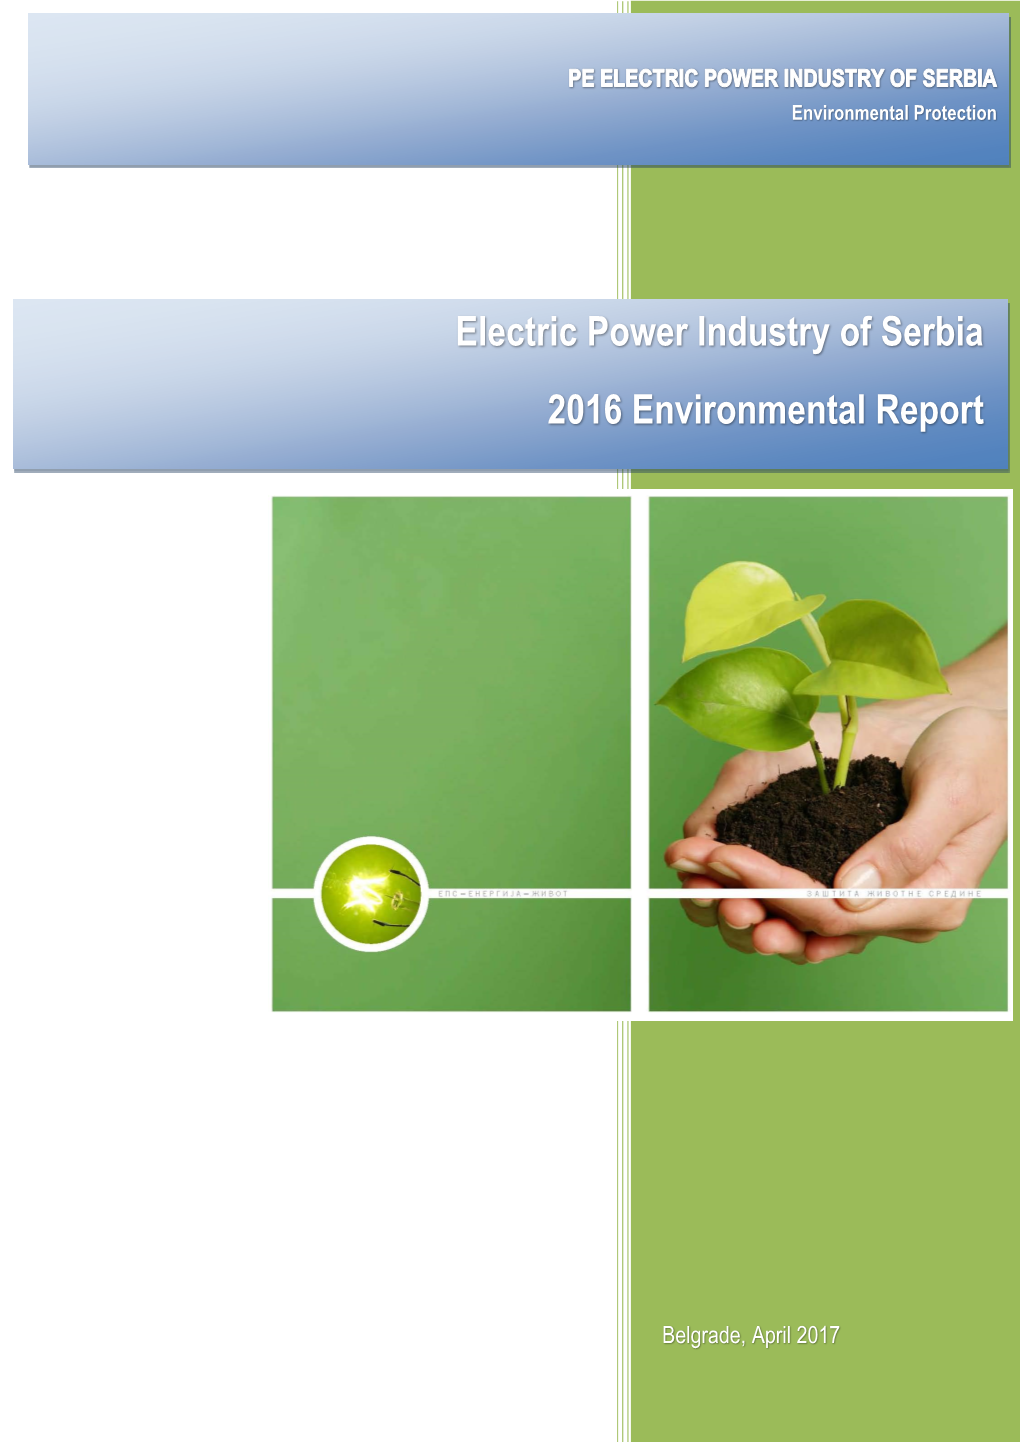 The PE EPS Environmental Report for 2016